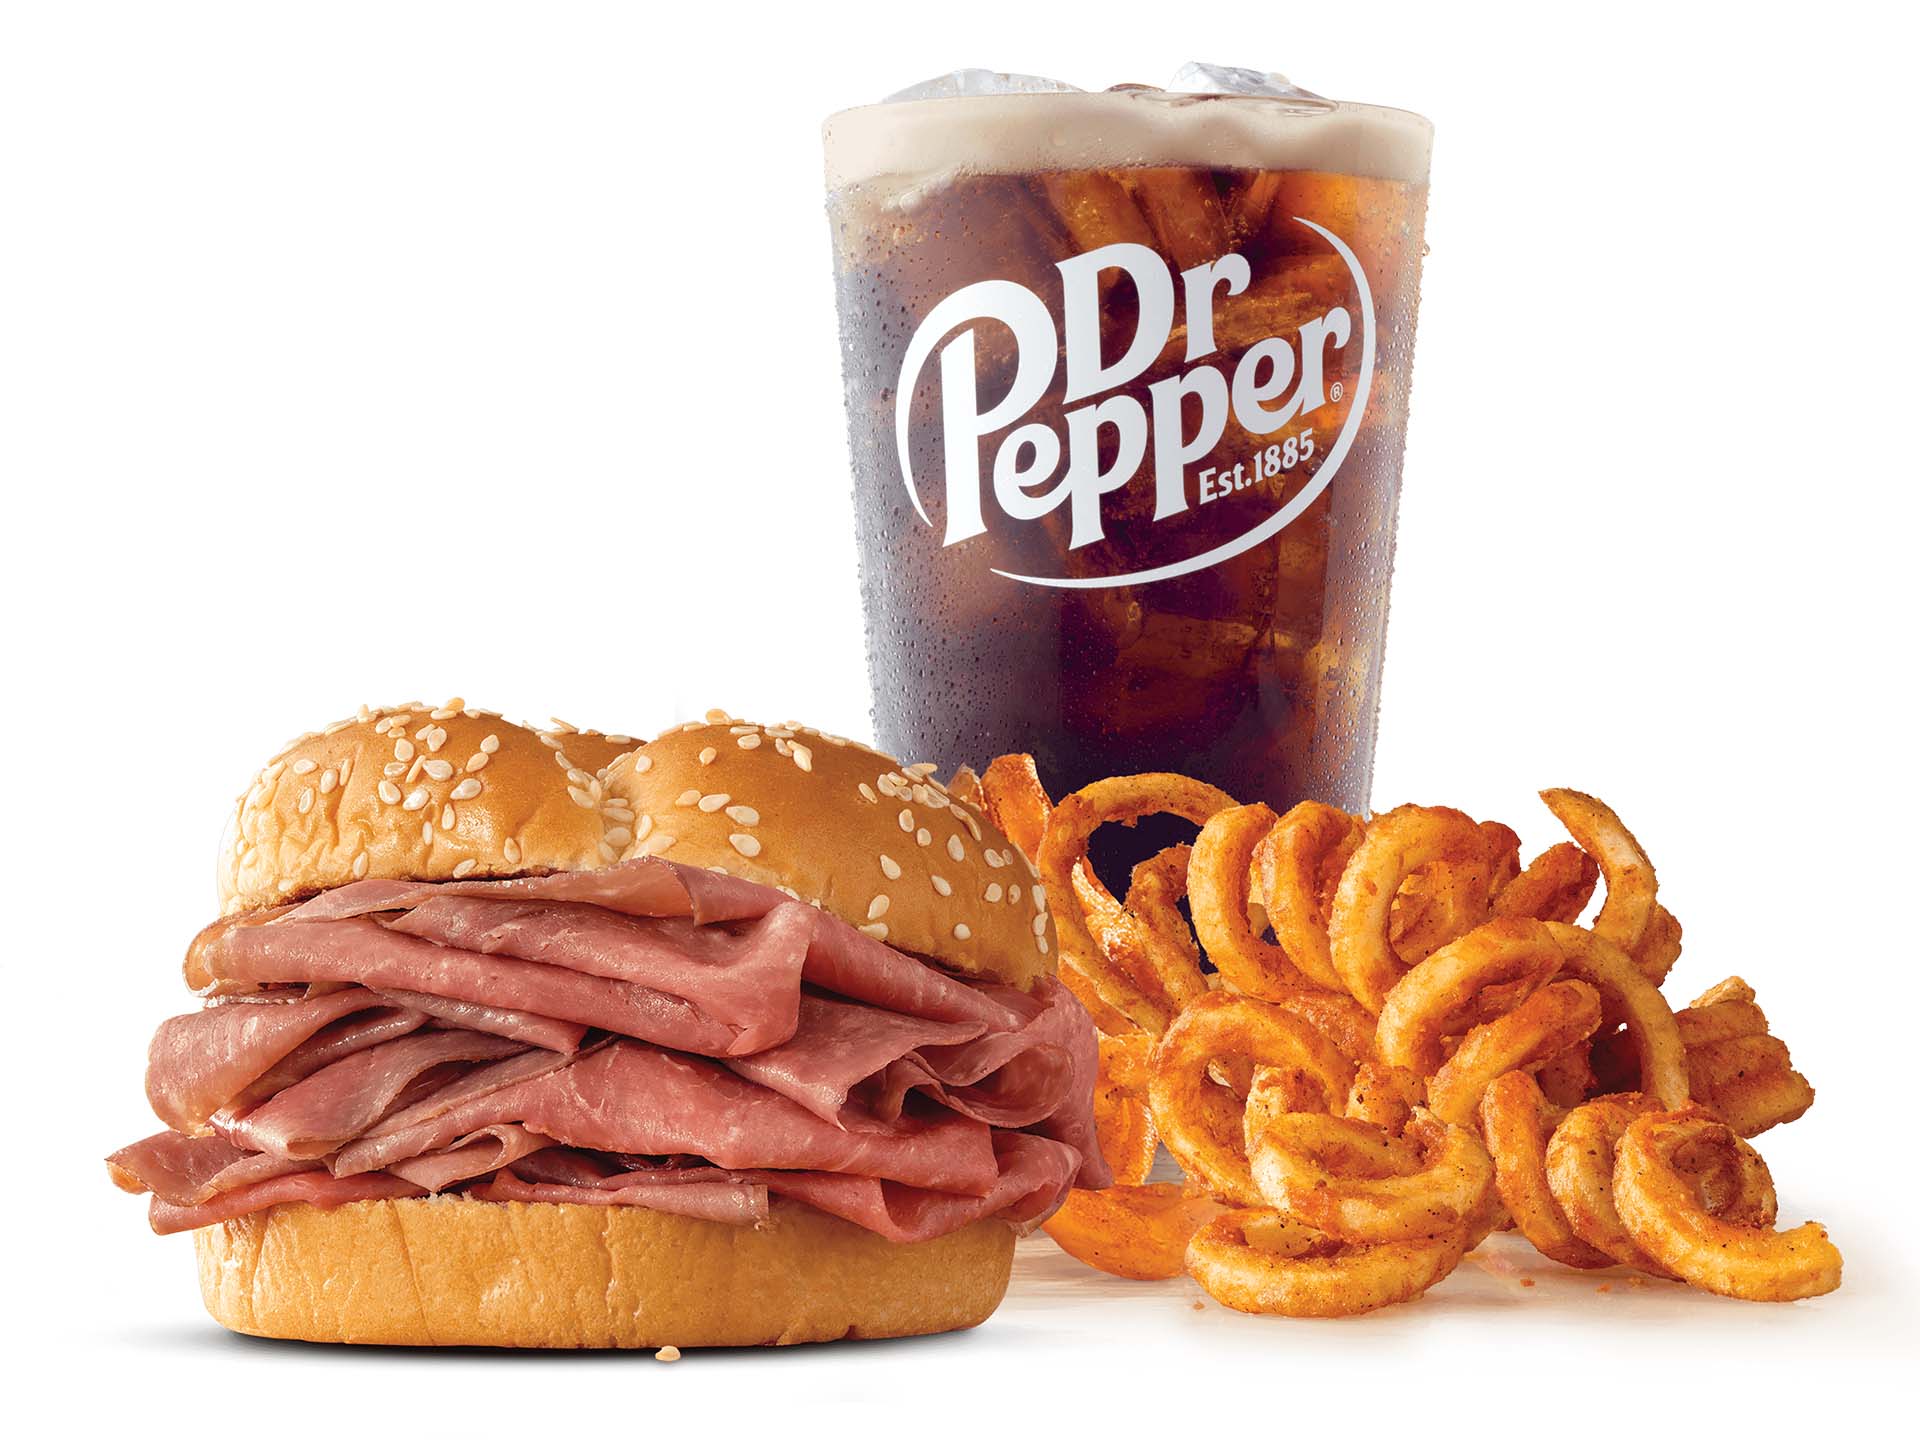 Arby's classic roast beef meal in Everett, WA